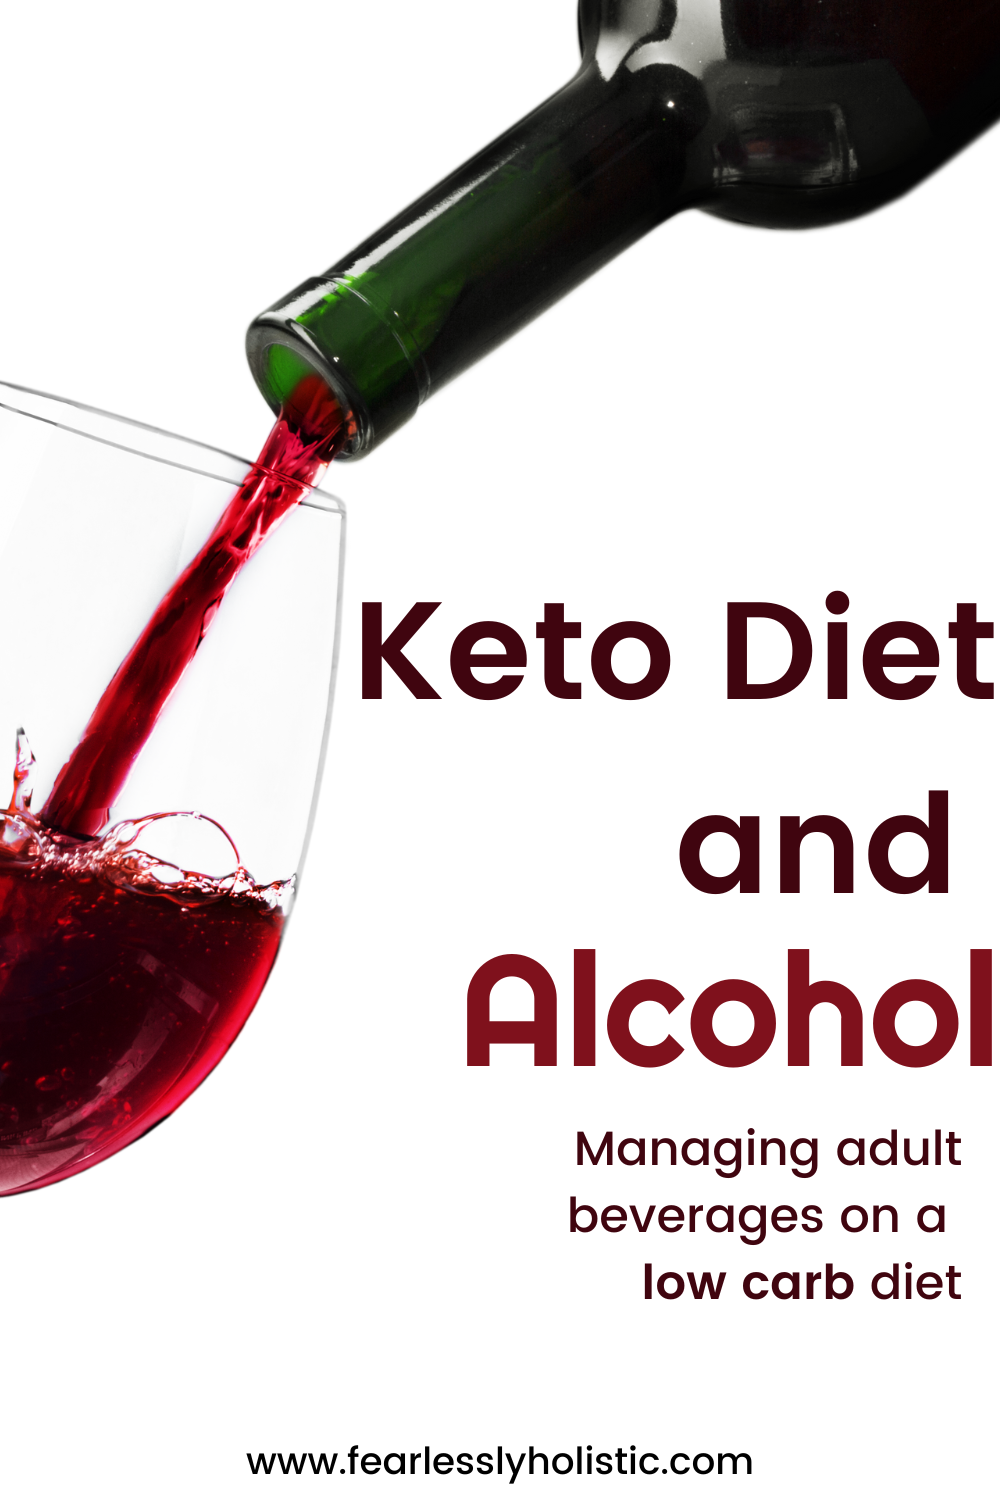 The Keto Diet and Alcohol